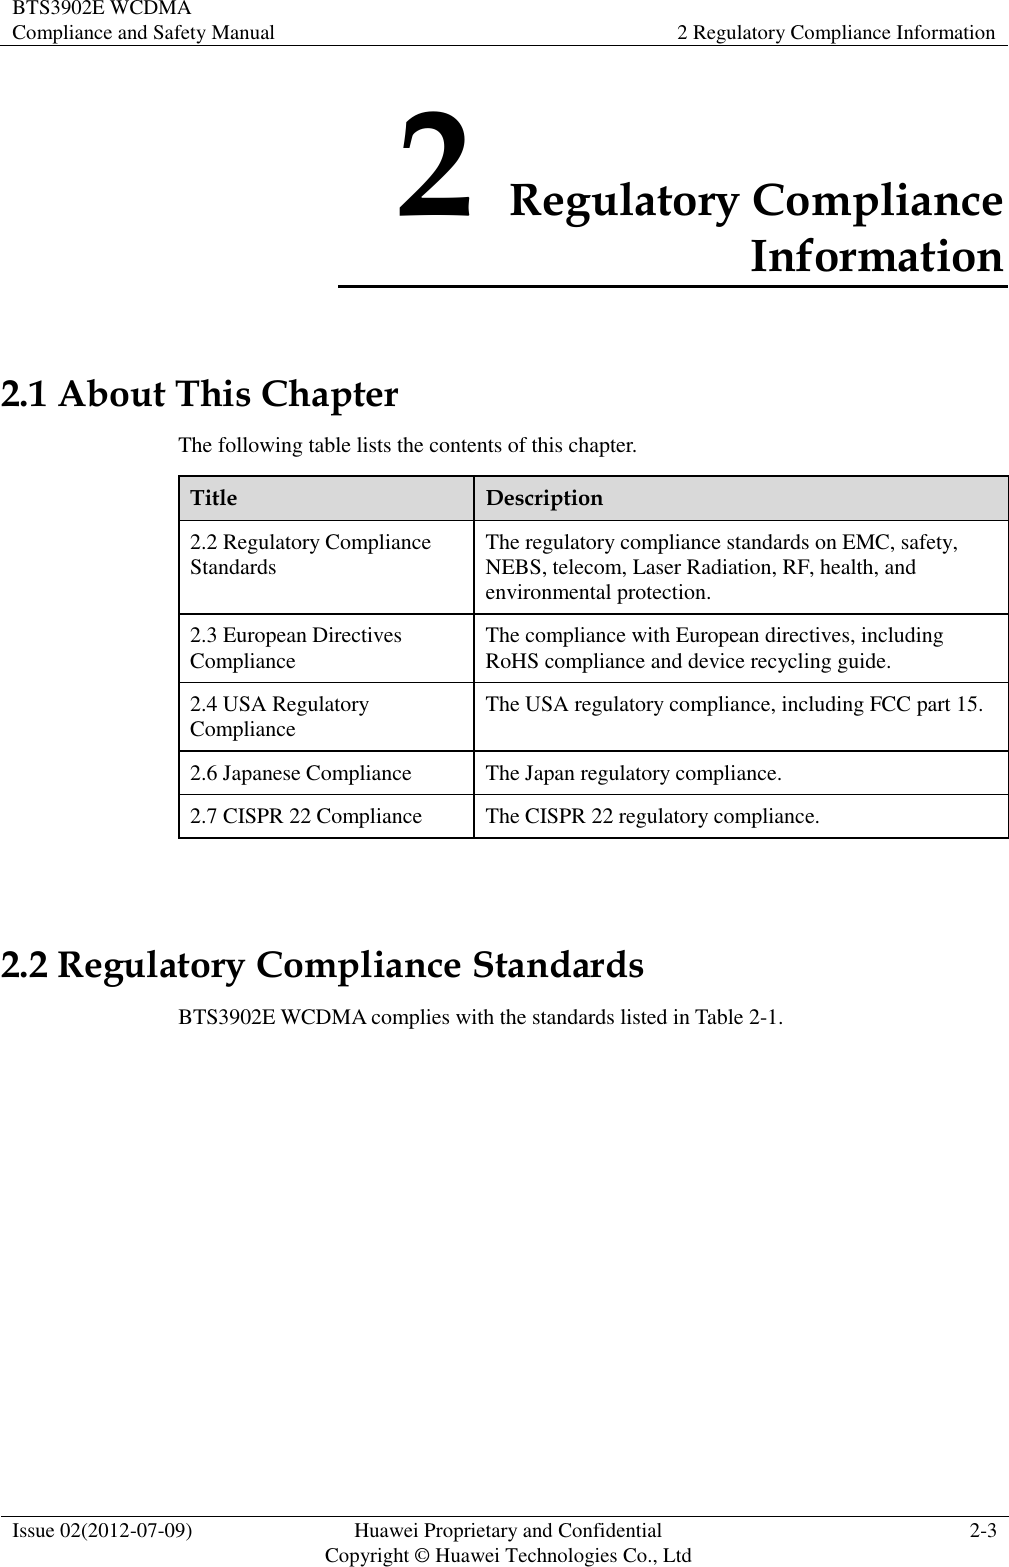 BTS3902E WCDMA Compliance and Safety Manual 2 Regulatory Compliance Information  Issue 02(2012-07-09) Huawei Proprietary and Confidential           Copyright © Huawei Technologies Co., Ltd 2-3  2 Regulatory Compliance Information 2.1 About This Chapter The following table lists the contents of this chapter. Title Description 2.2 Regulatory Compliance Standards The regulatory compliance standards on EMC, safety, NEBS, telecom, Laser Radiation, RF, health, and environmental protection. 2.3 European Directives Compliance The compliance with European directives, including RoHS compliance and device recycling guide. 2.4 USA Regulatory Compliance The USA regulatory compliance, including FCC part 15. 2.6 Japanese Compliance The Japan regulatory compliance. 2.7 CISPR 22 Compliance The CISPR 22 regulatory compliance.  2.2 Regulatory Compliance Standards BTS3902E WCDMA complies with the standards listed in Table 2-1. 